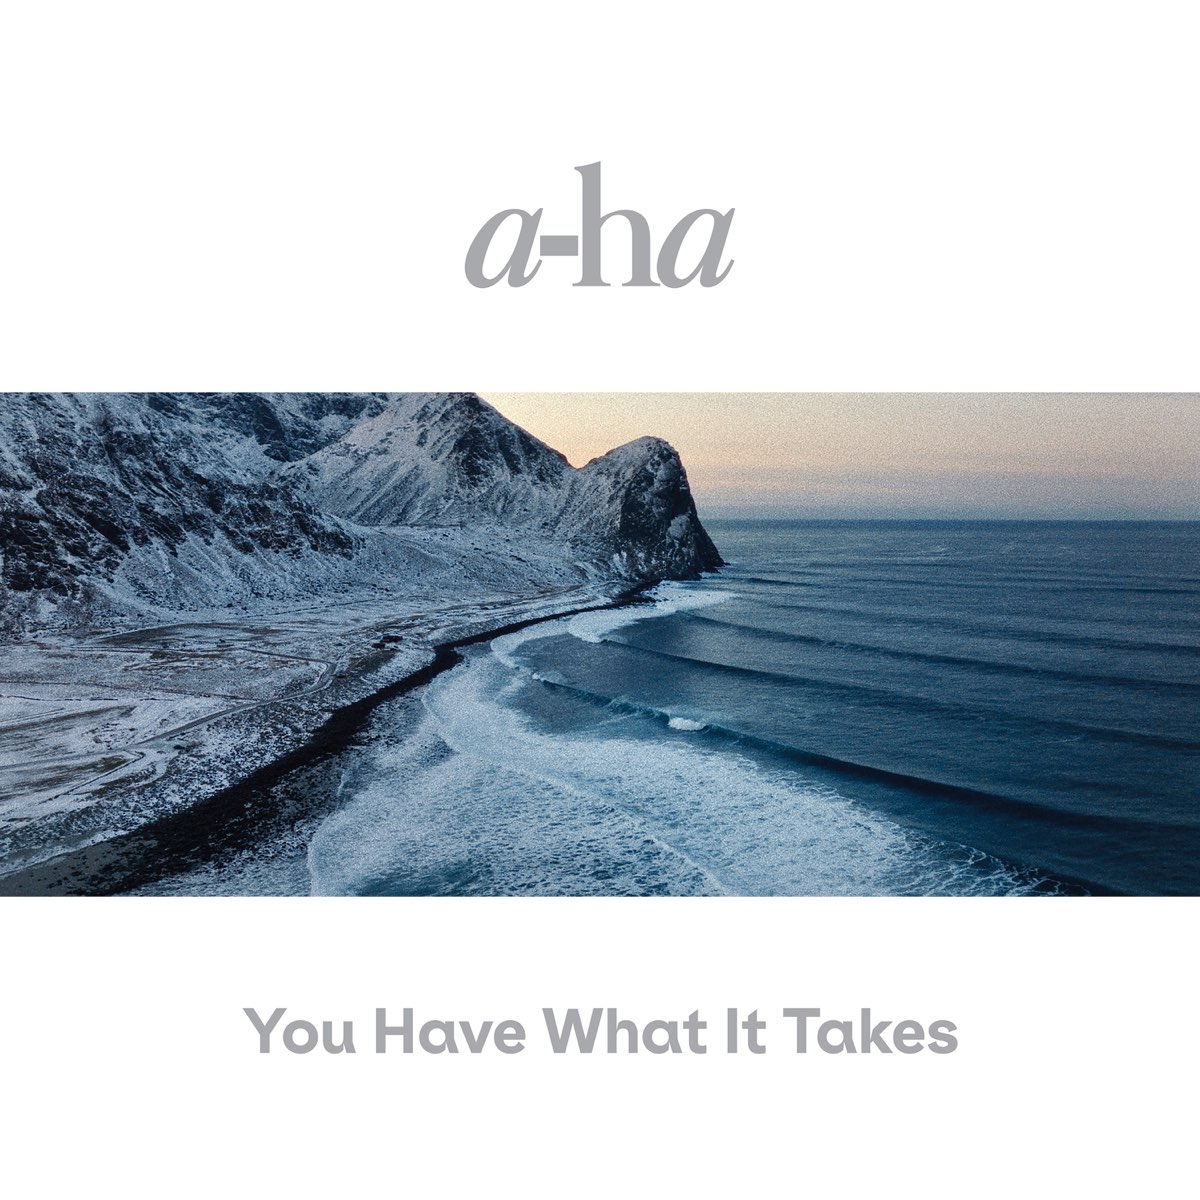 a-ha — You Have What It Takes cover artwork